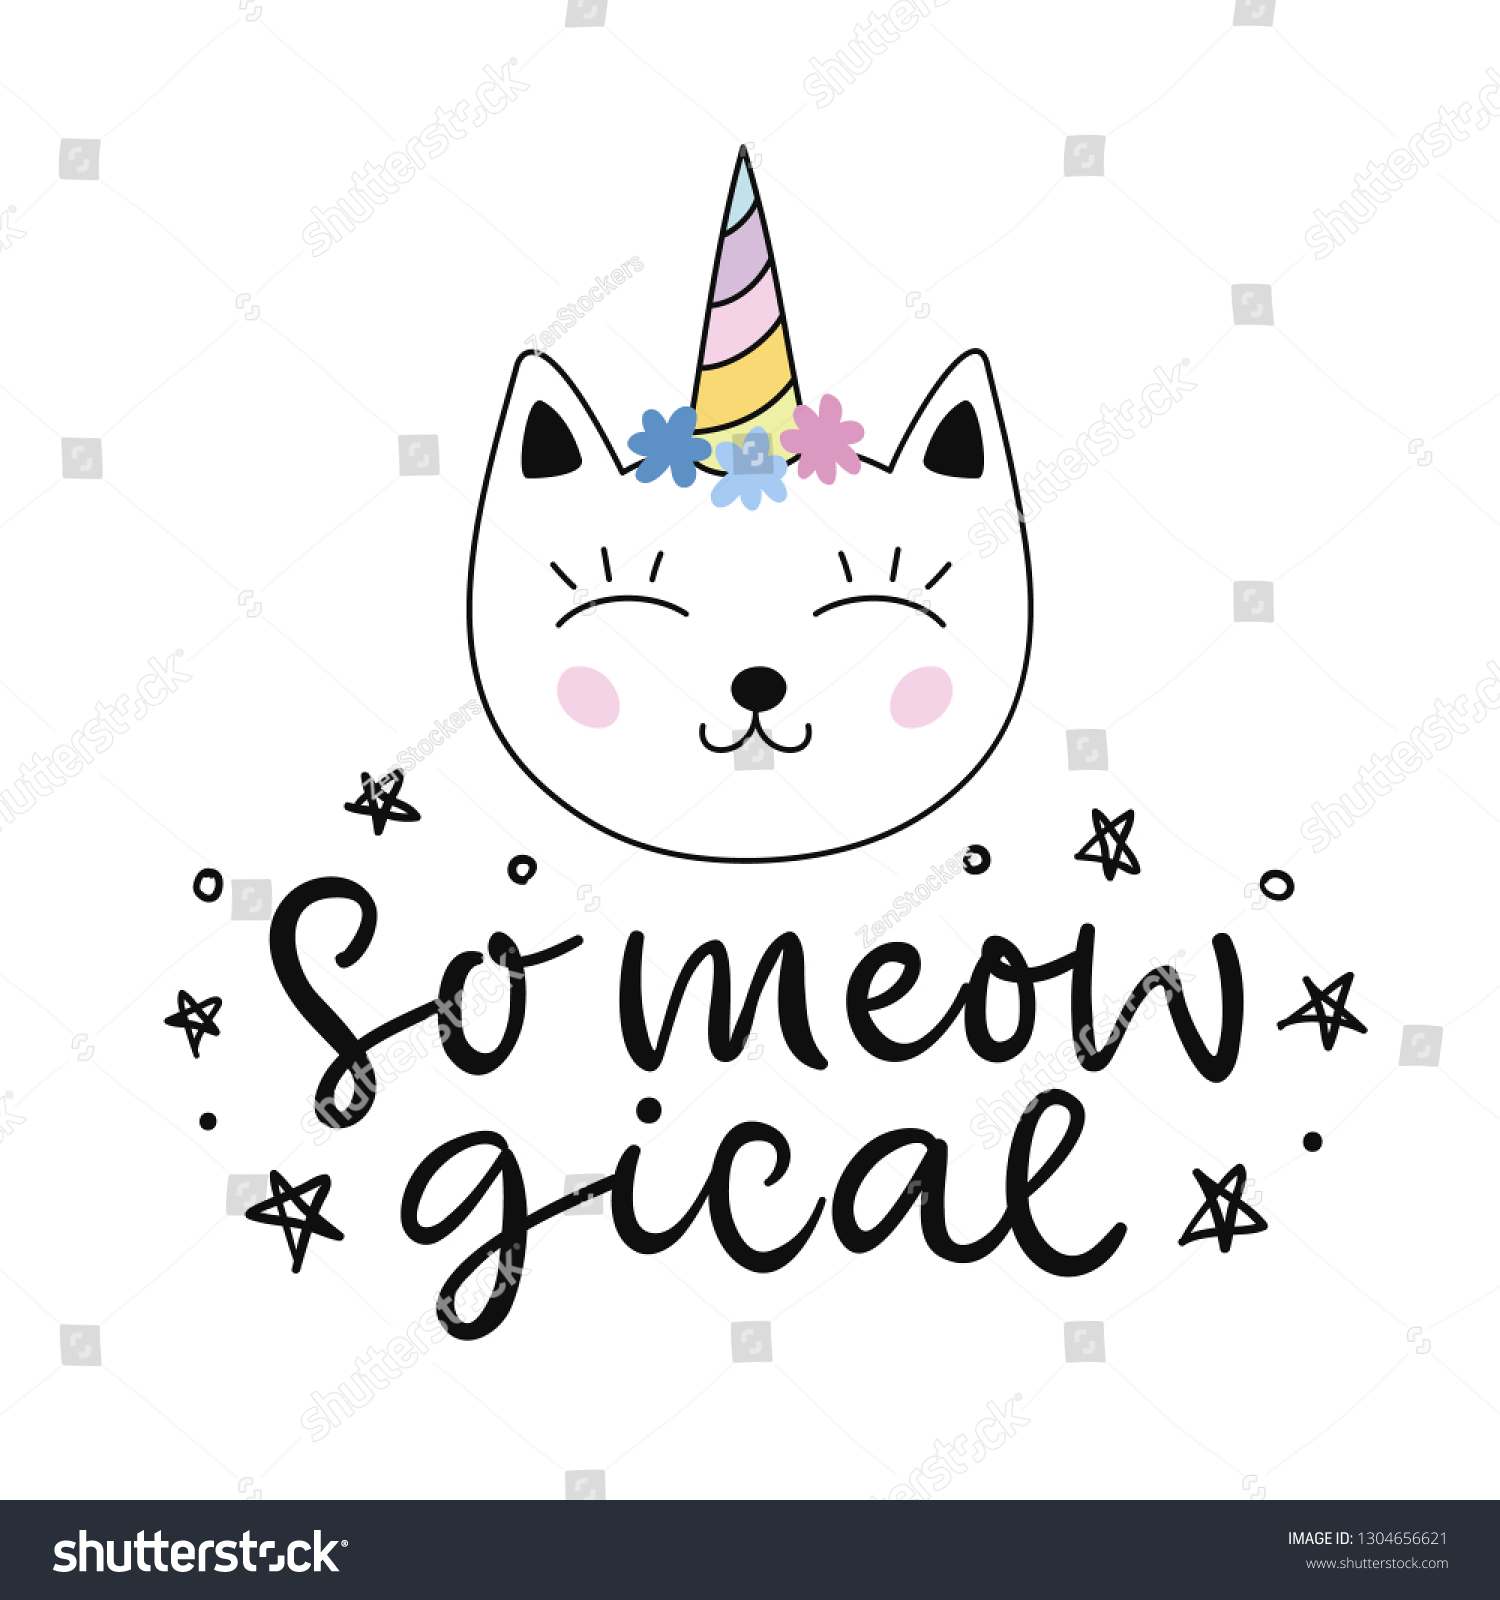 SVG of Caticorn. Vector cute cat unicorn cartoon character. Magic hand drawn kitty for t shirt print, kids birthday party, sticker, baby shower, nursery poster, greeting card illustration. svg